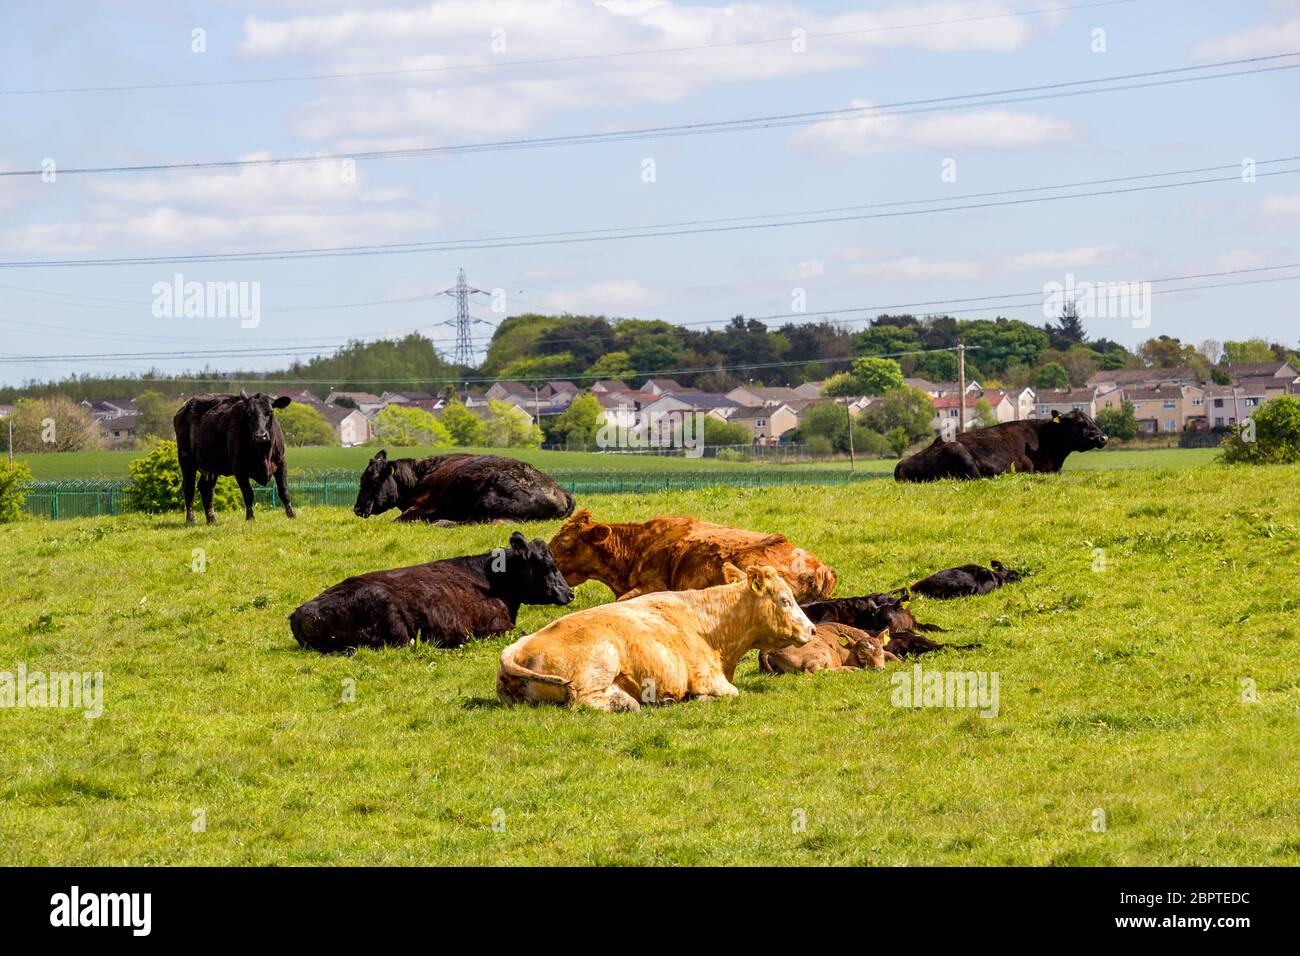 A herd of black and brown cows with young calves resting in the fields in Spring time, Glen Mavis, Scotland, UK Stock Photo